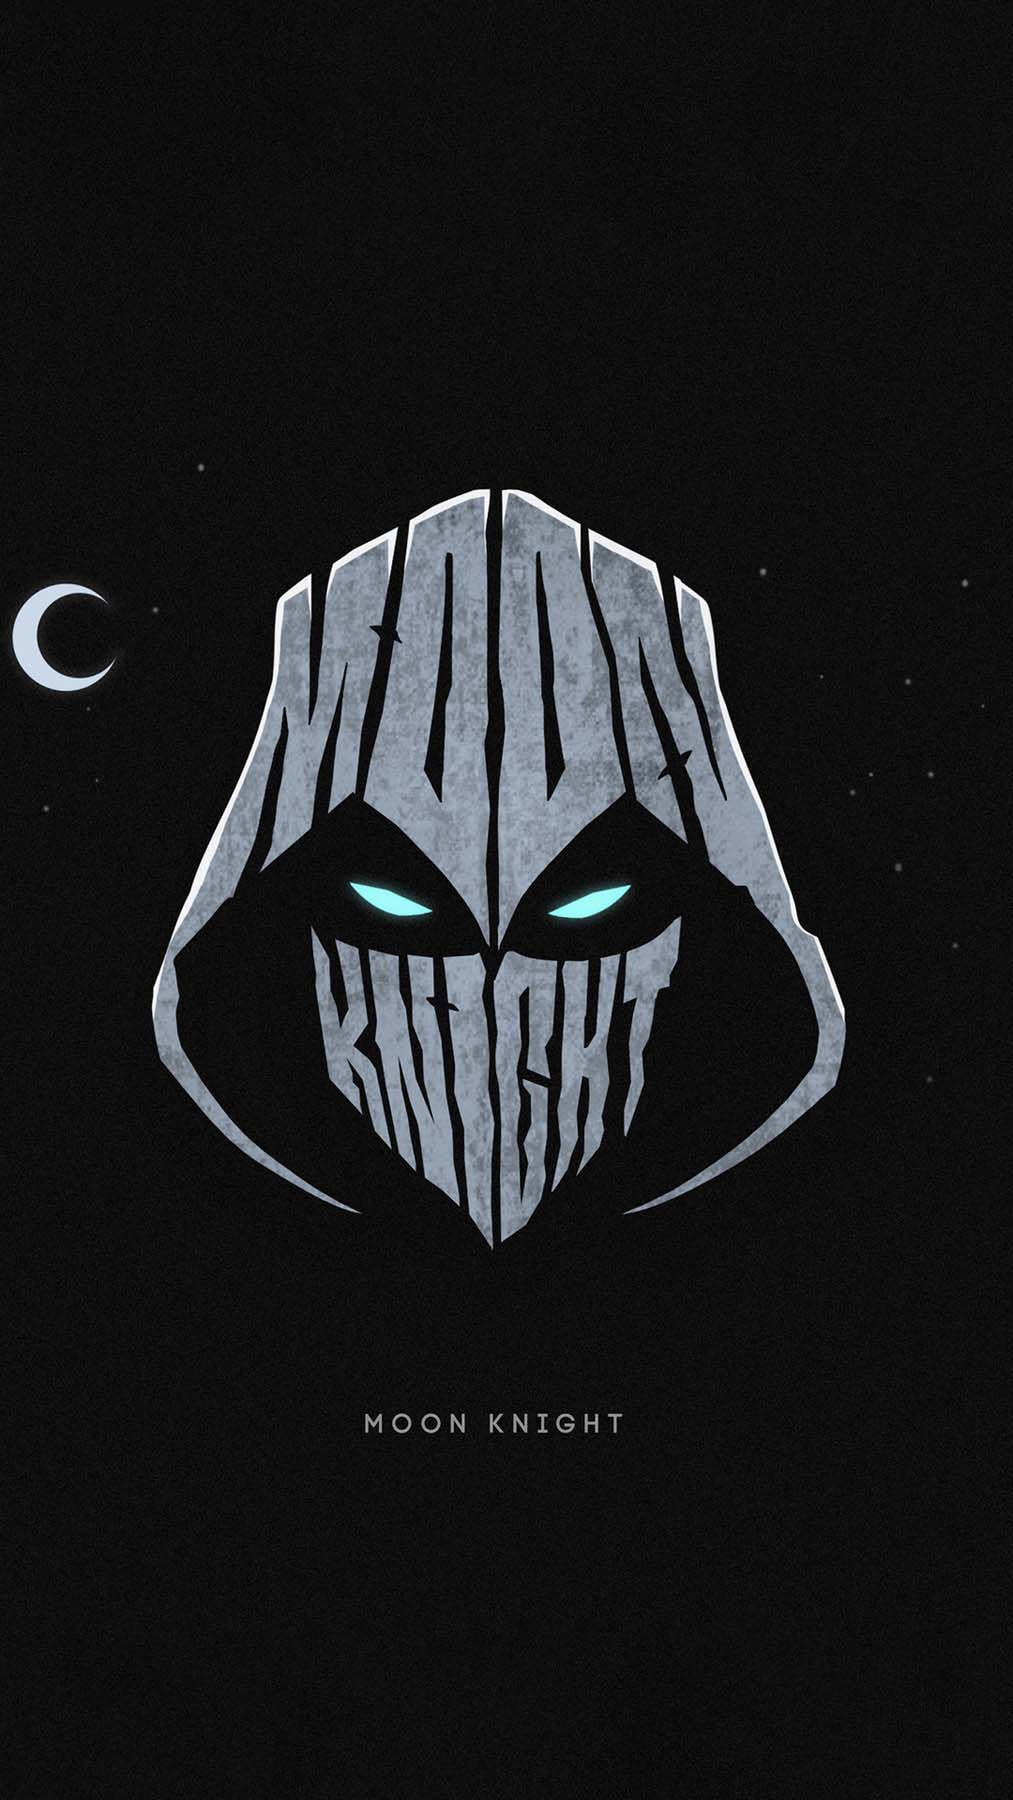 Moon Knight Background HD Wallpapers 126457 - Baltana